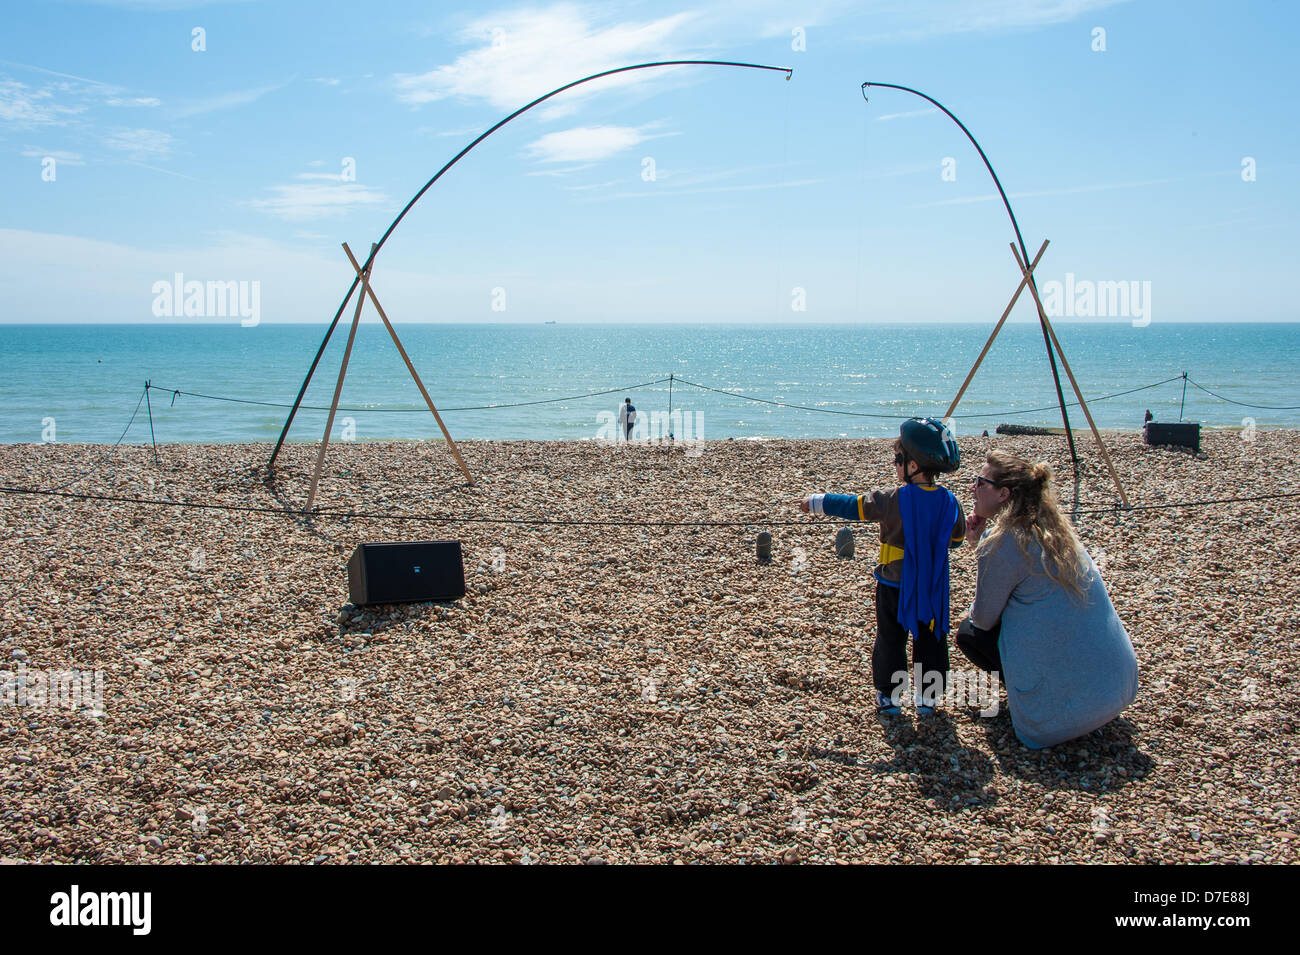 Brighton, UK. 5th May 2013. Jony Easterby's Rol mo wind horse: Stress and Stone - part of 'Audible Forces' Aeolian music on the beach at Brighton Festival, Sackville Gardens Beach, Western Esplanade, Hove, East Sussex UK May 5th 2013 phot Credit: Julia Claxton/Alamy Live News Stock Photo